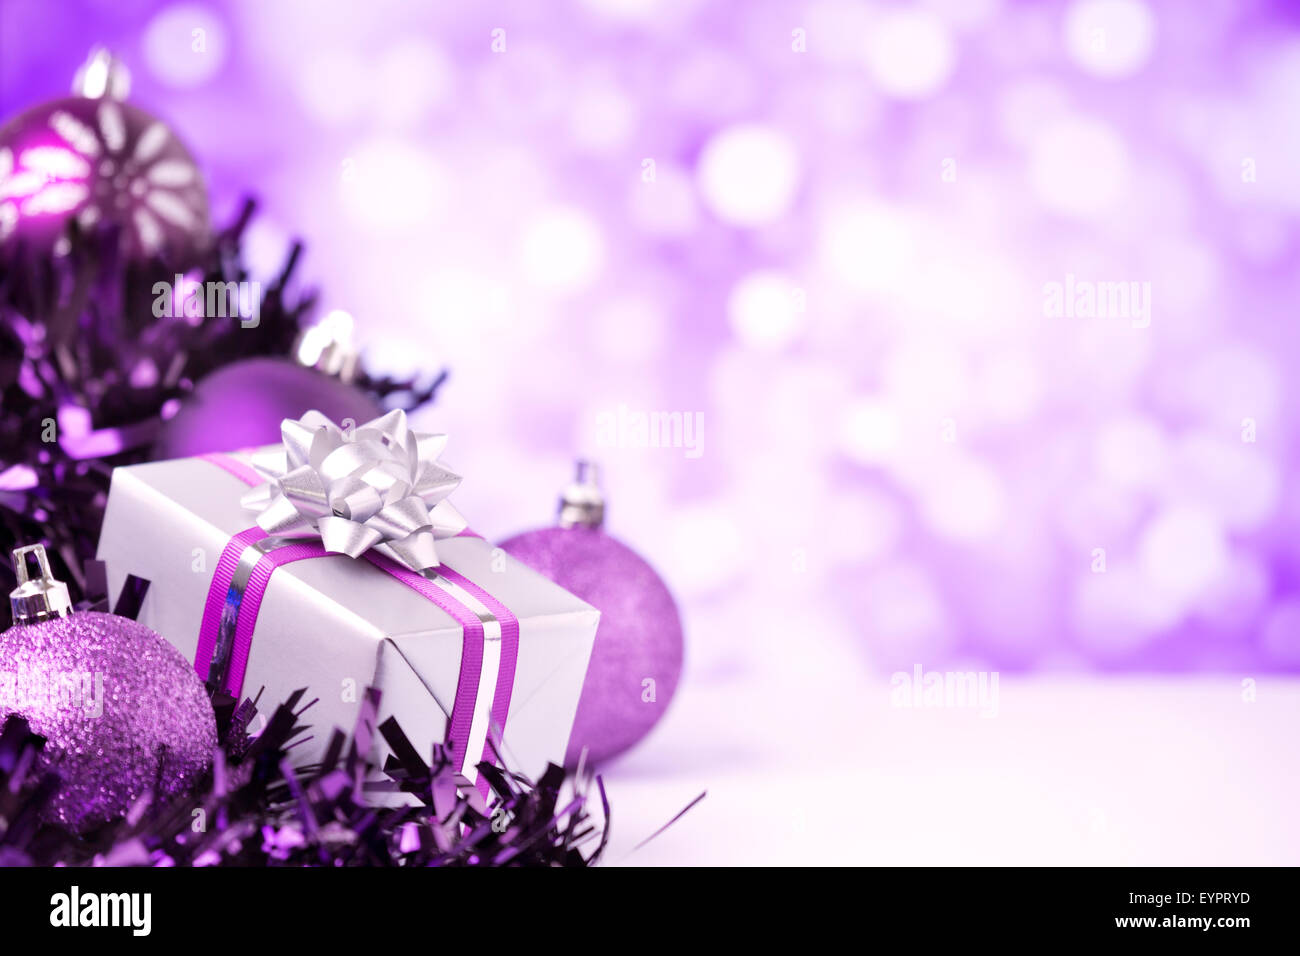 Purple and silver Christmas baubles and a gift in front of defocused purple and white lights. Stock Photo